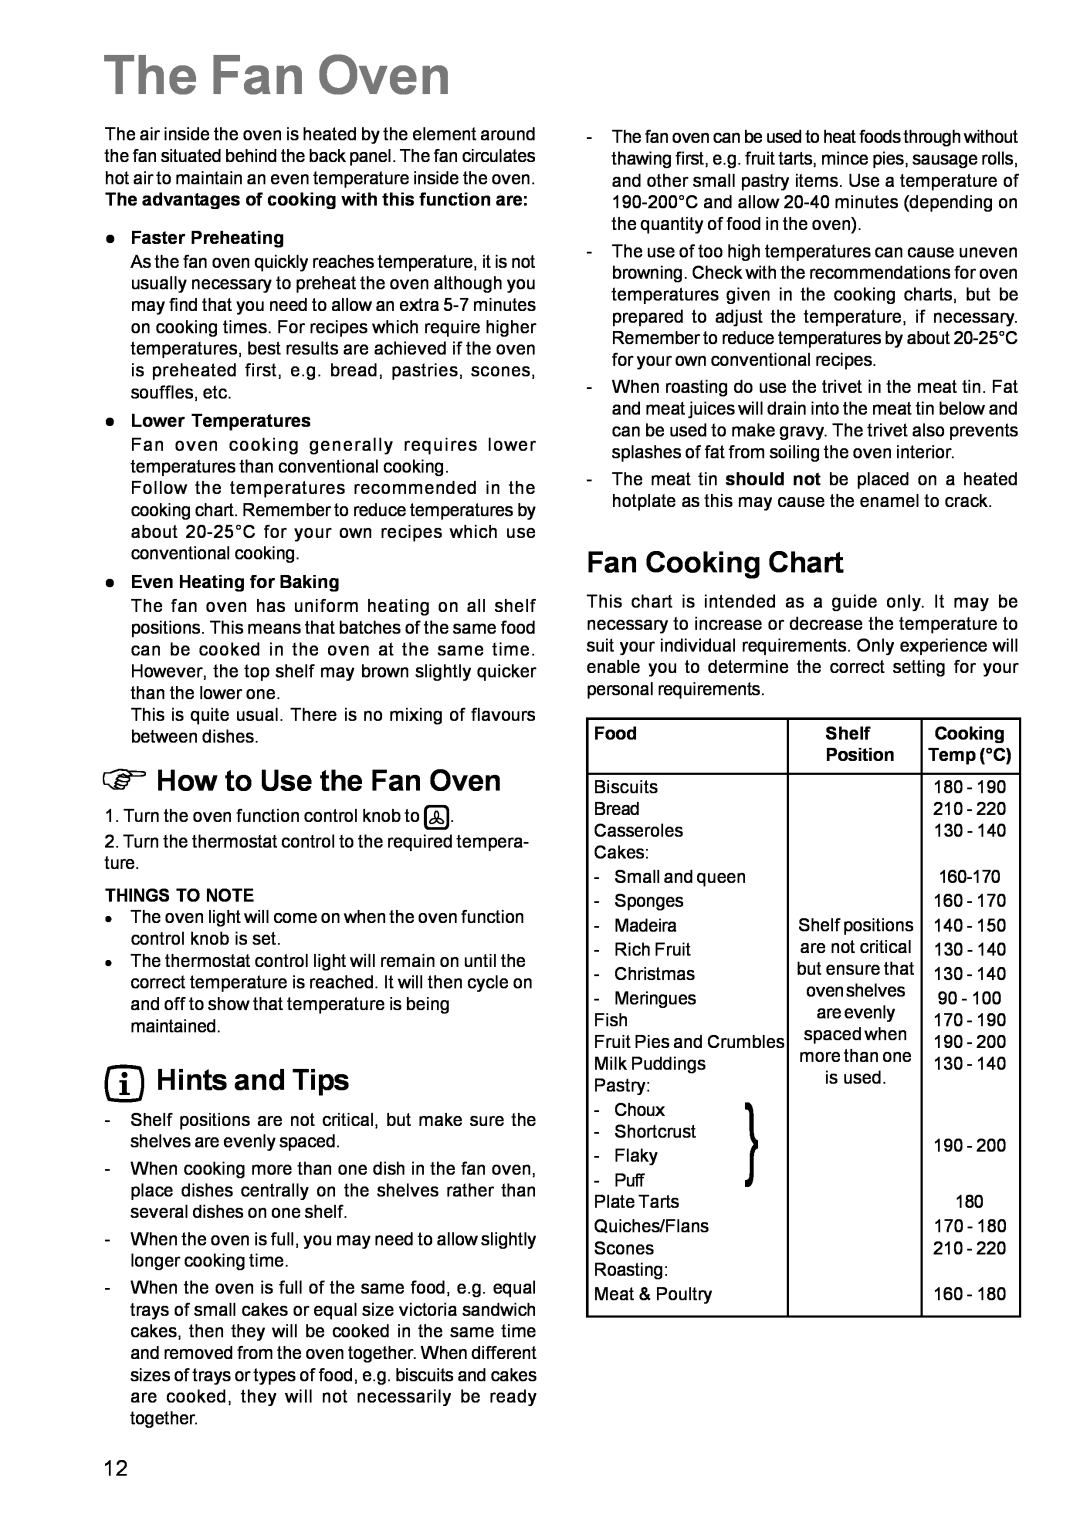 Zanussi ZCM 631 manual The Fan Oven, Φ How to Use the Fan Oven, Fan Cooking Chart, Hints and Tips 